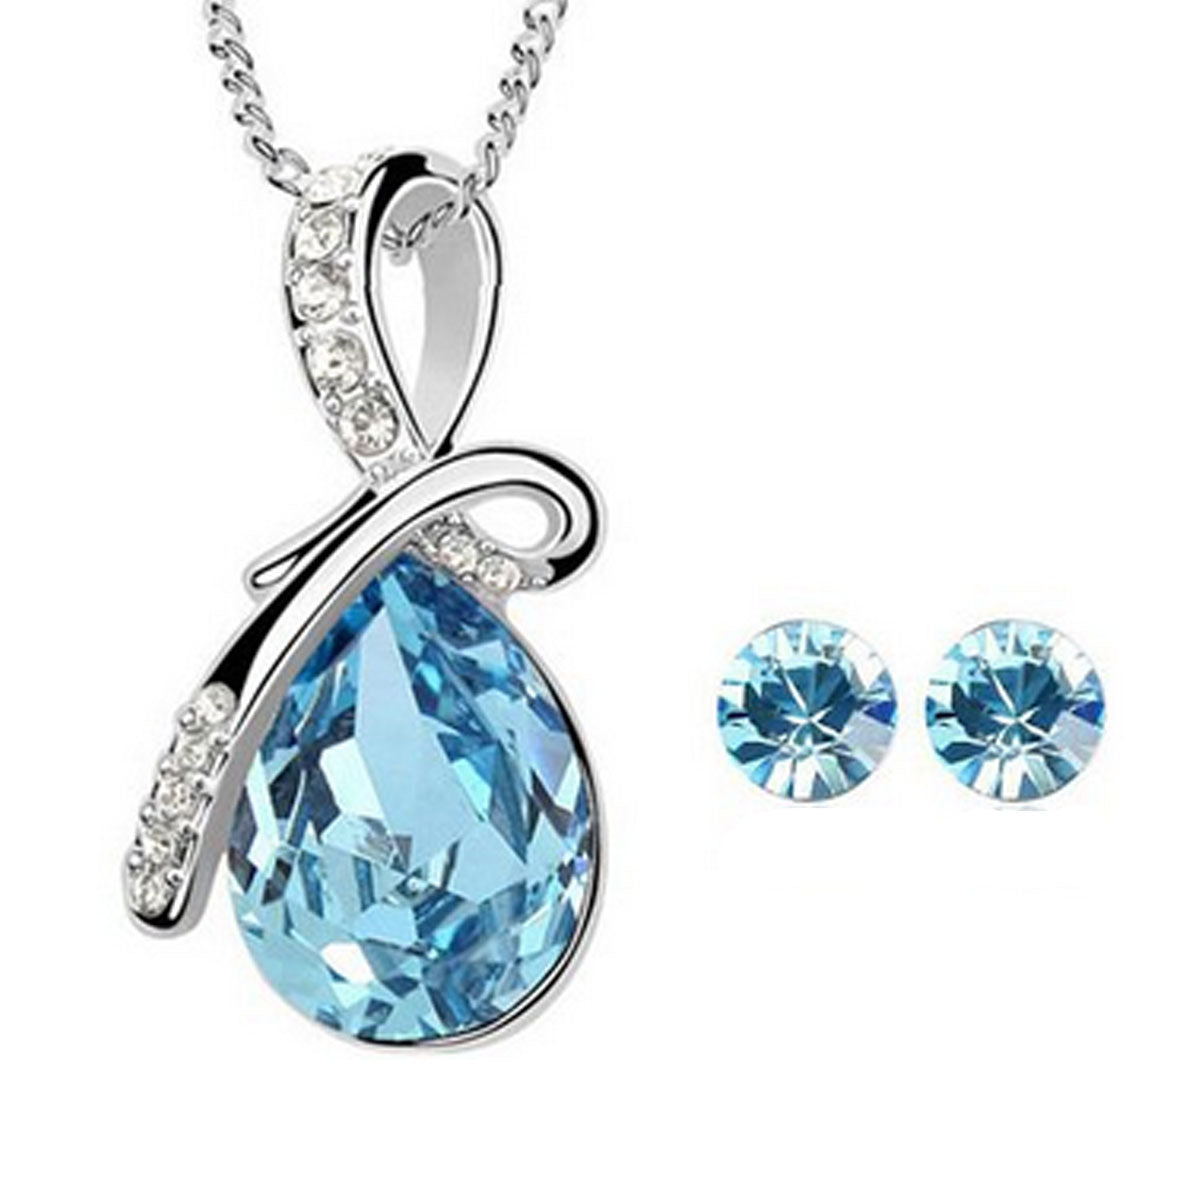 Wrapables Eternal Love Crystal Teardrop Pendant Necklace and Stud Earrings Jewelry Set